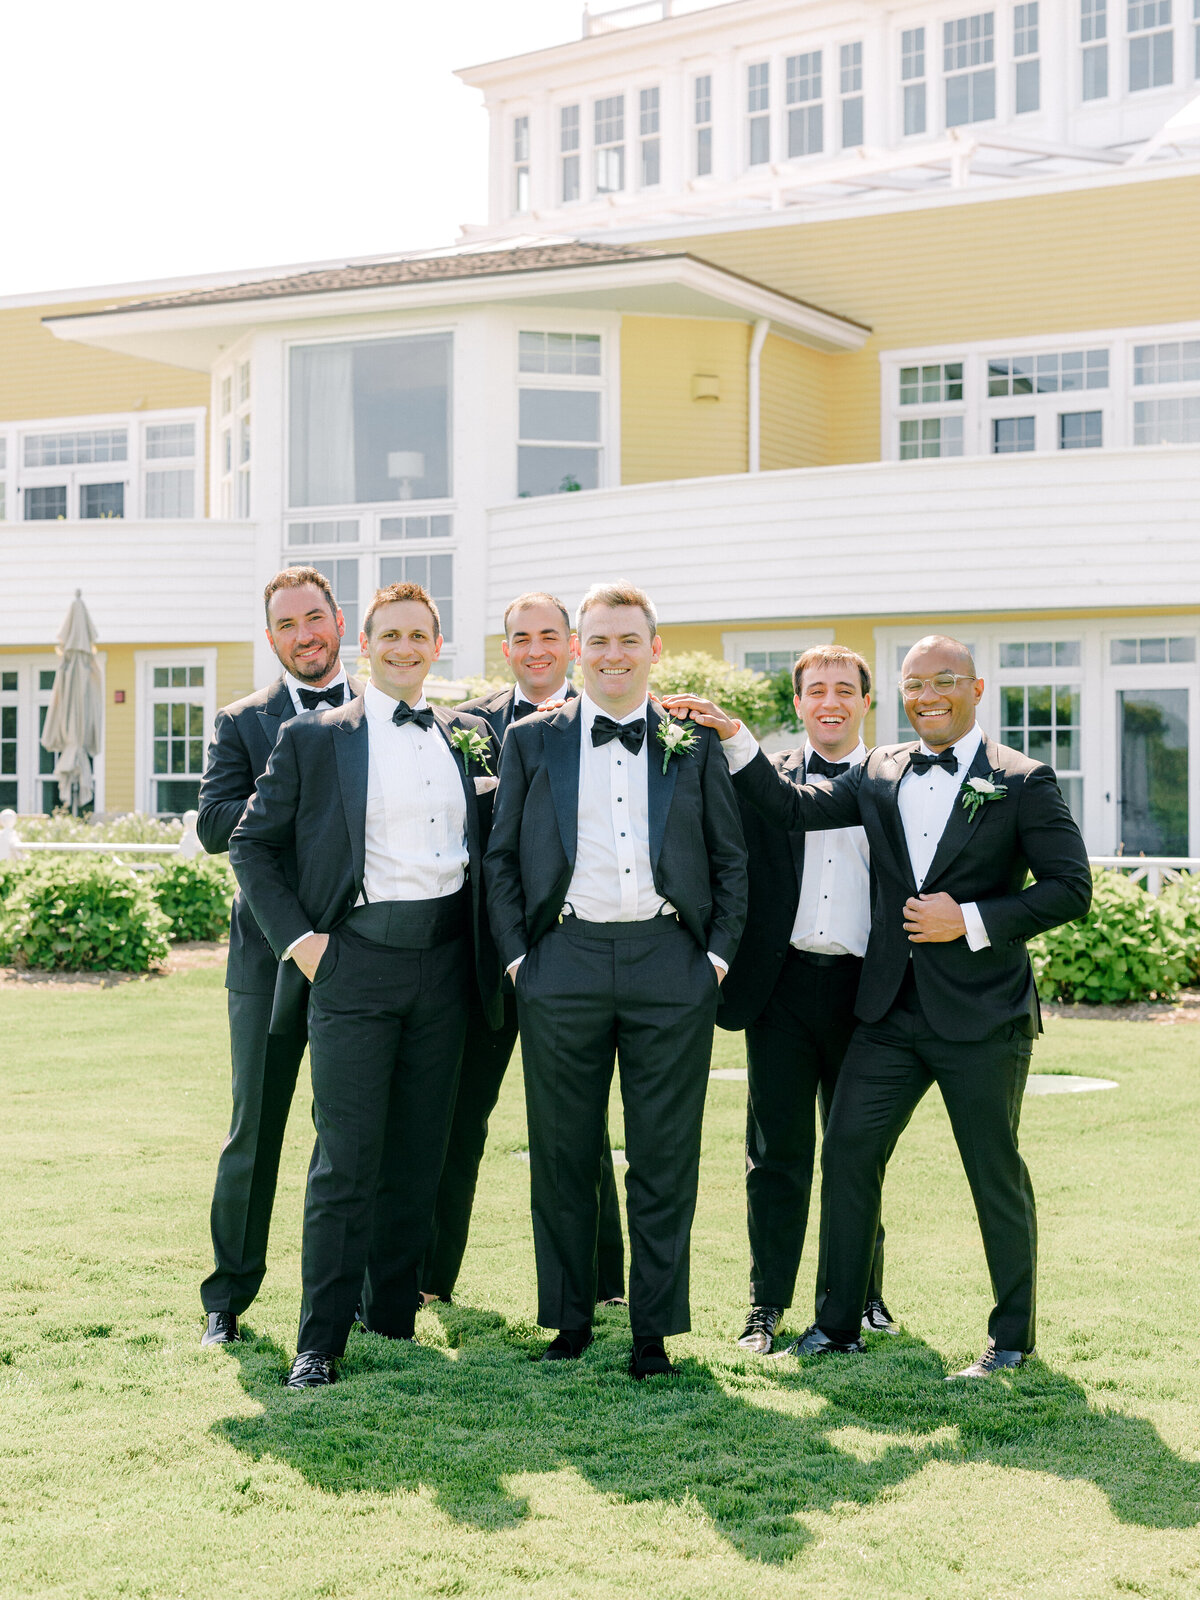 Group photo of groom and his groomsmen in front of a yellow building